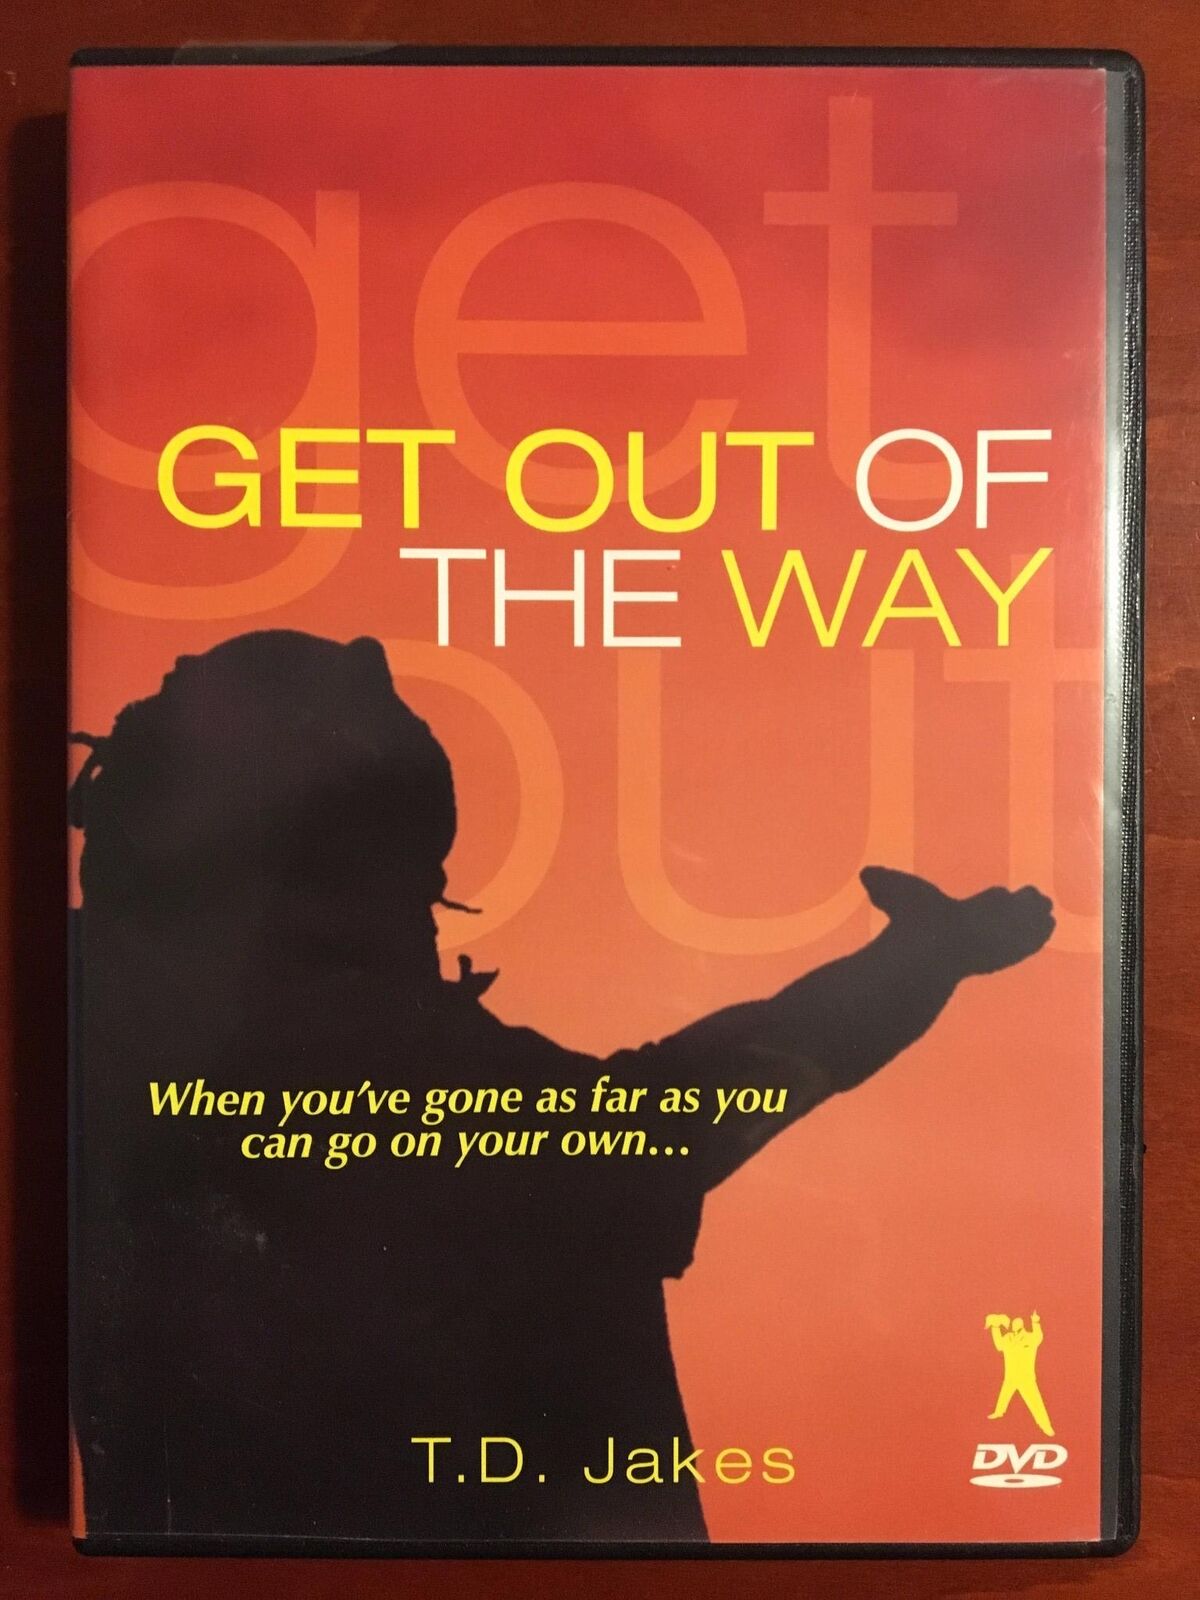 Get Out Of The Way DVD - T D Jakes